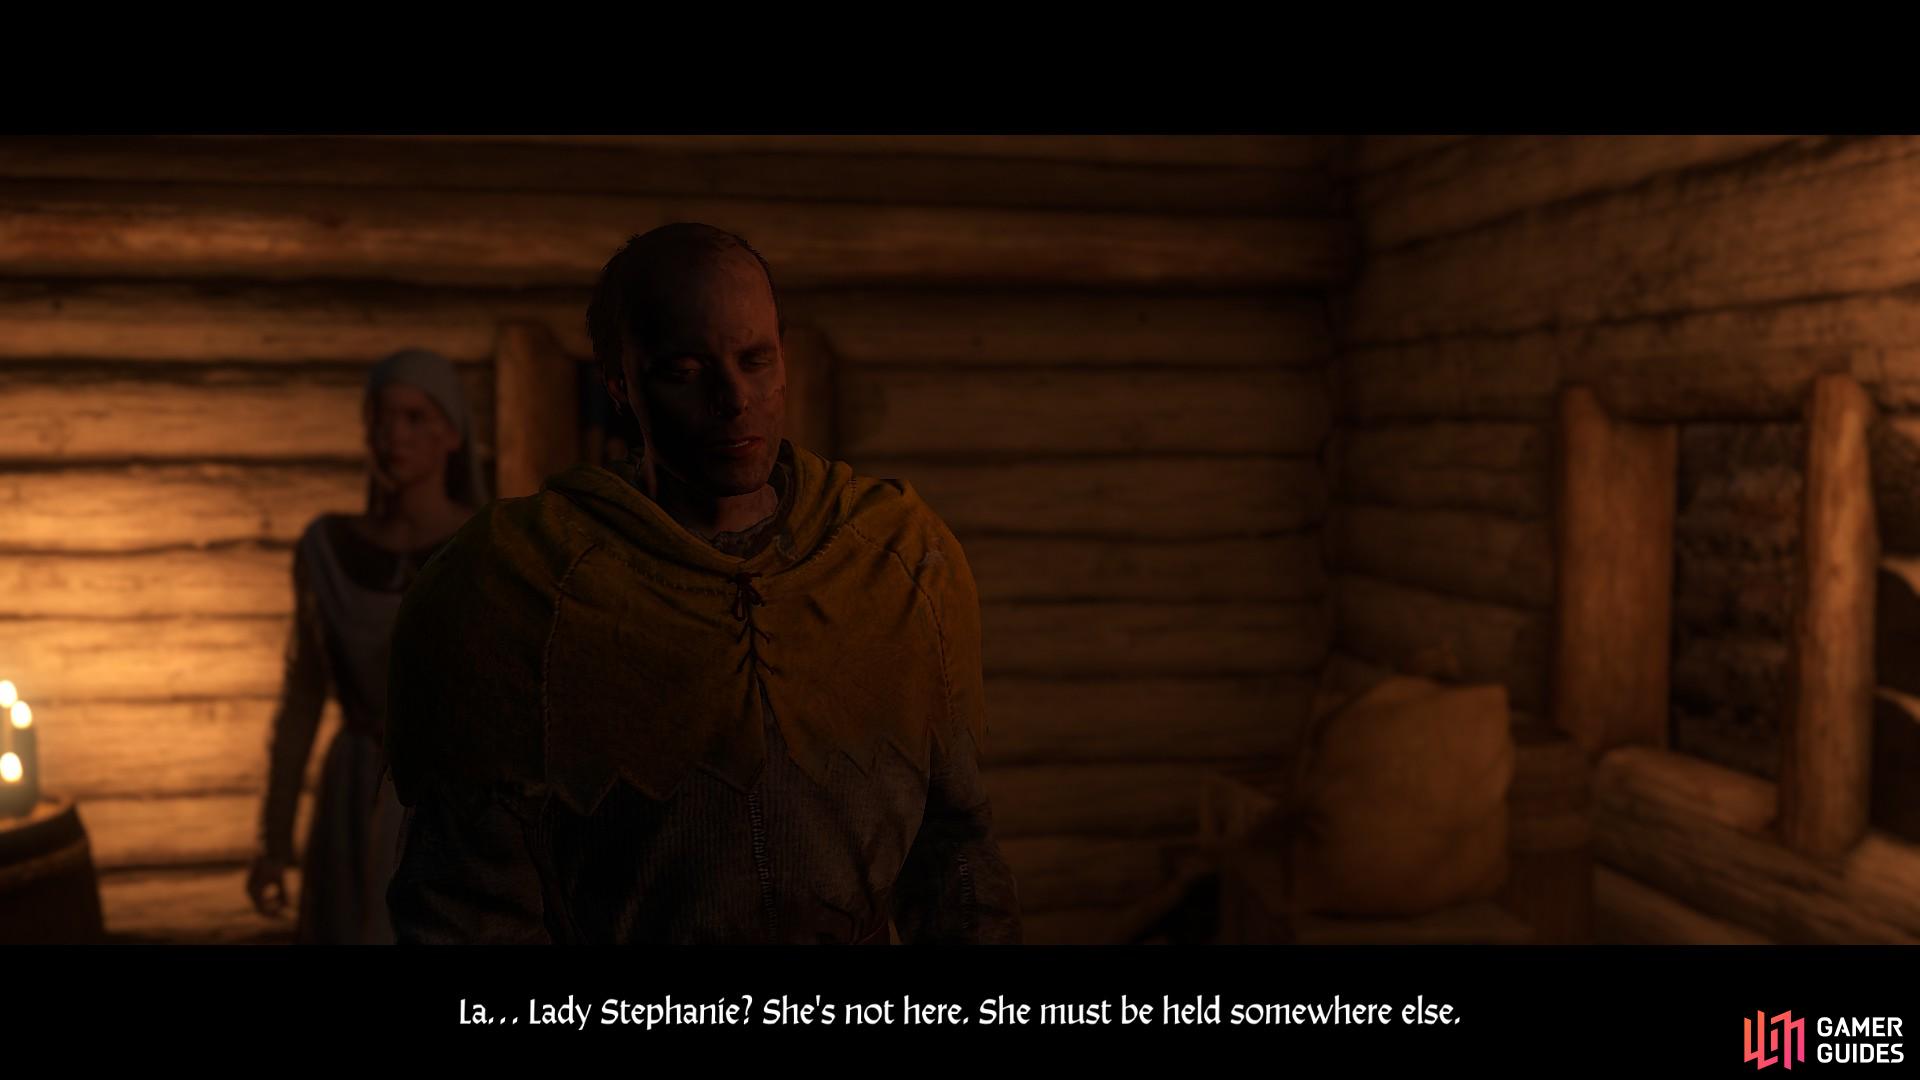 Speak with the villagers in the sleeping quarters to enquire about the location of Lady Stephanie and Sir Radzig.